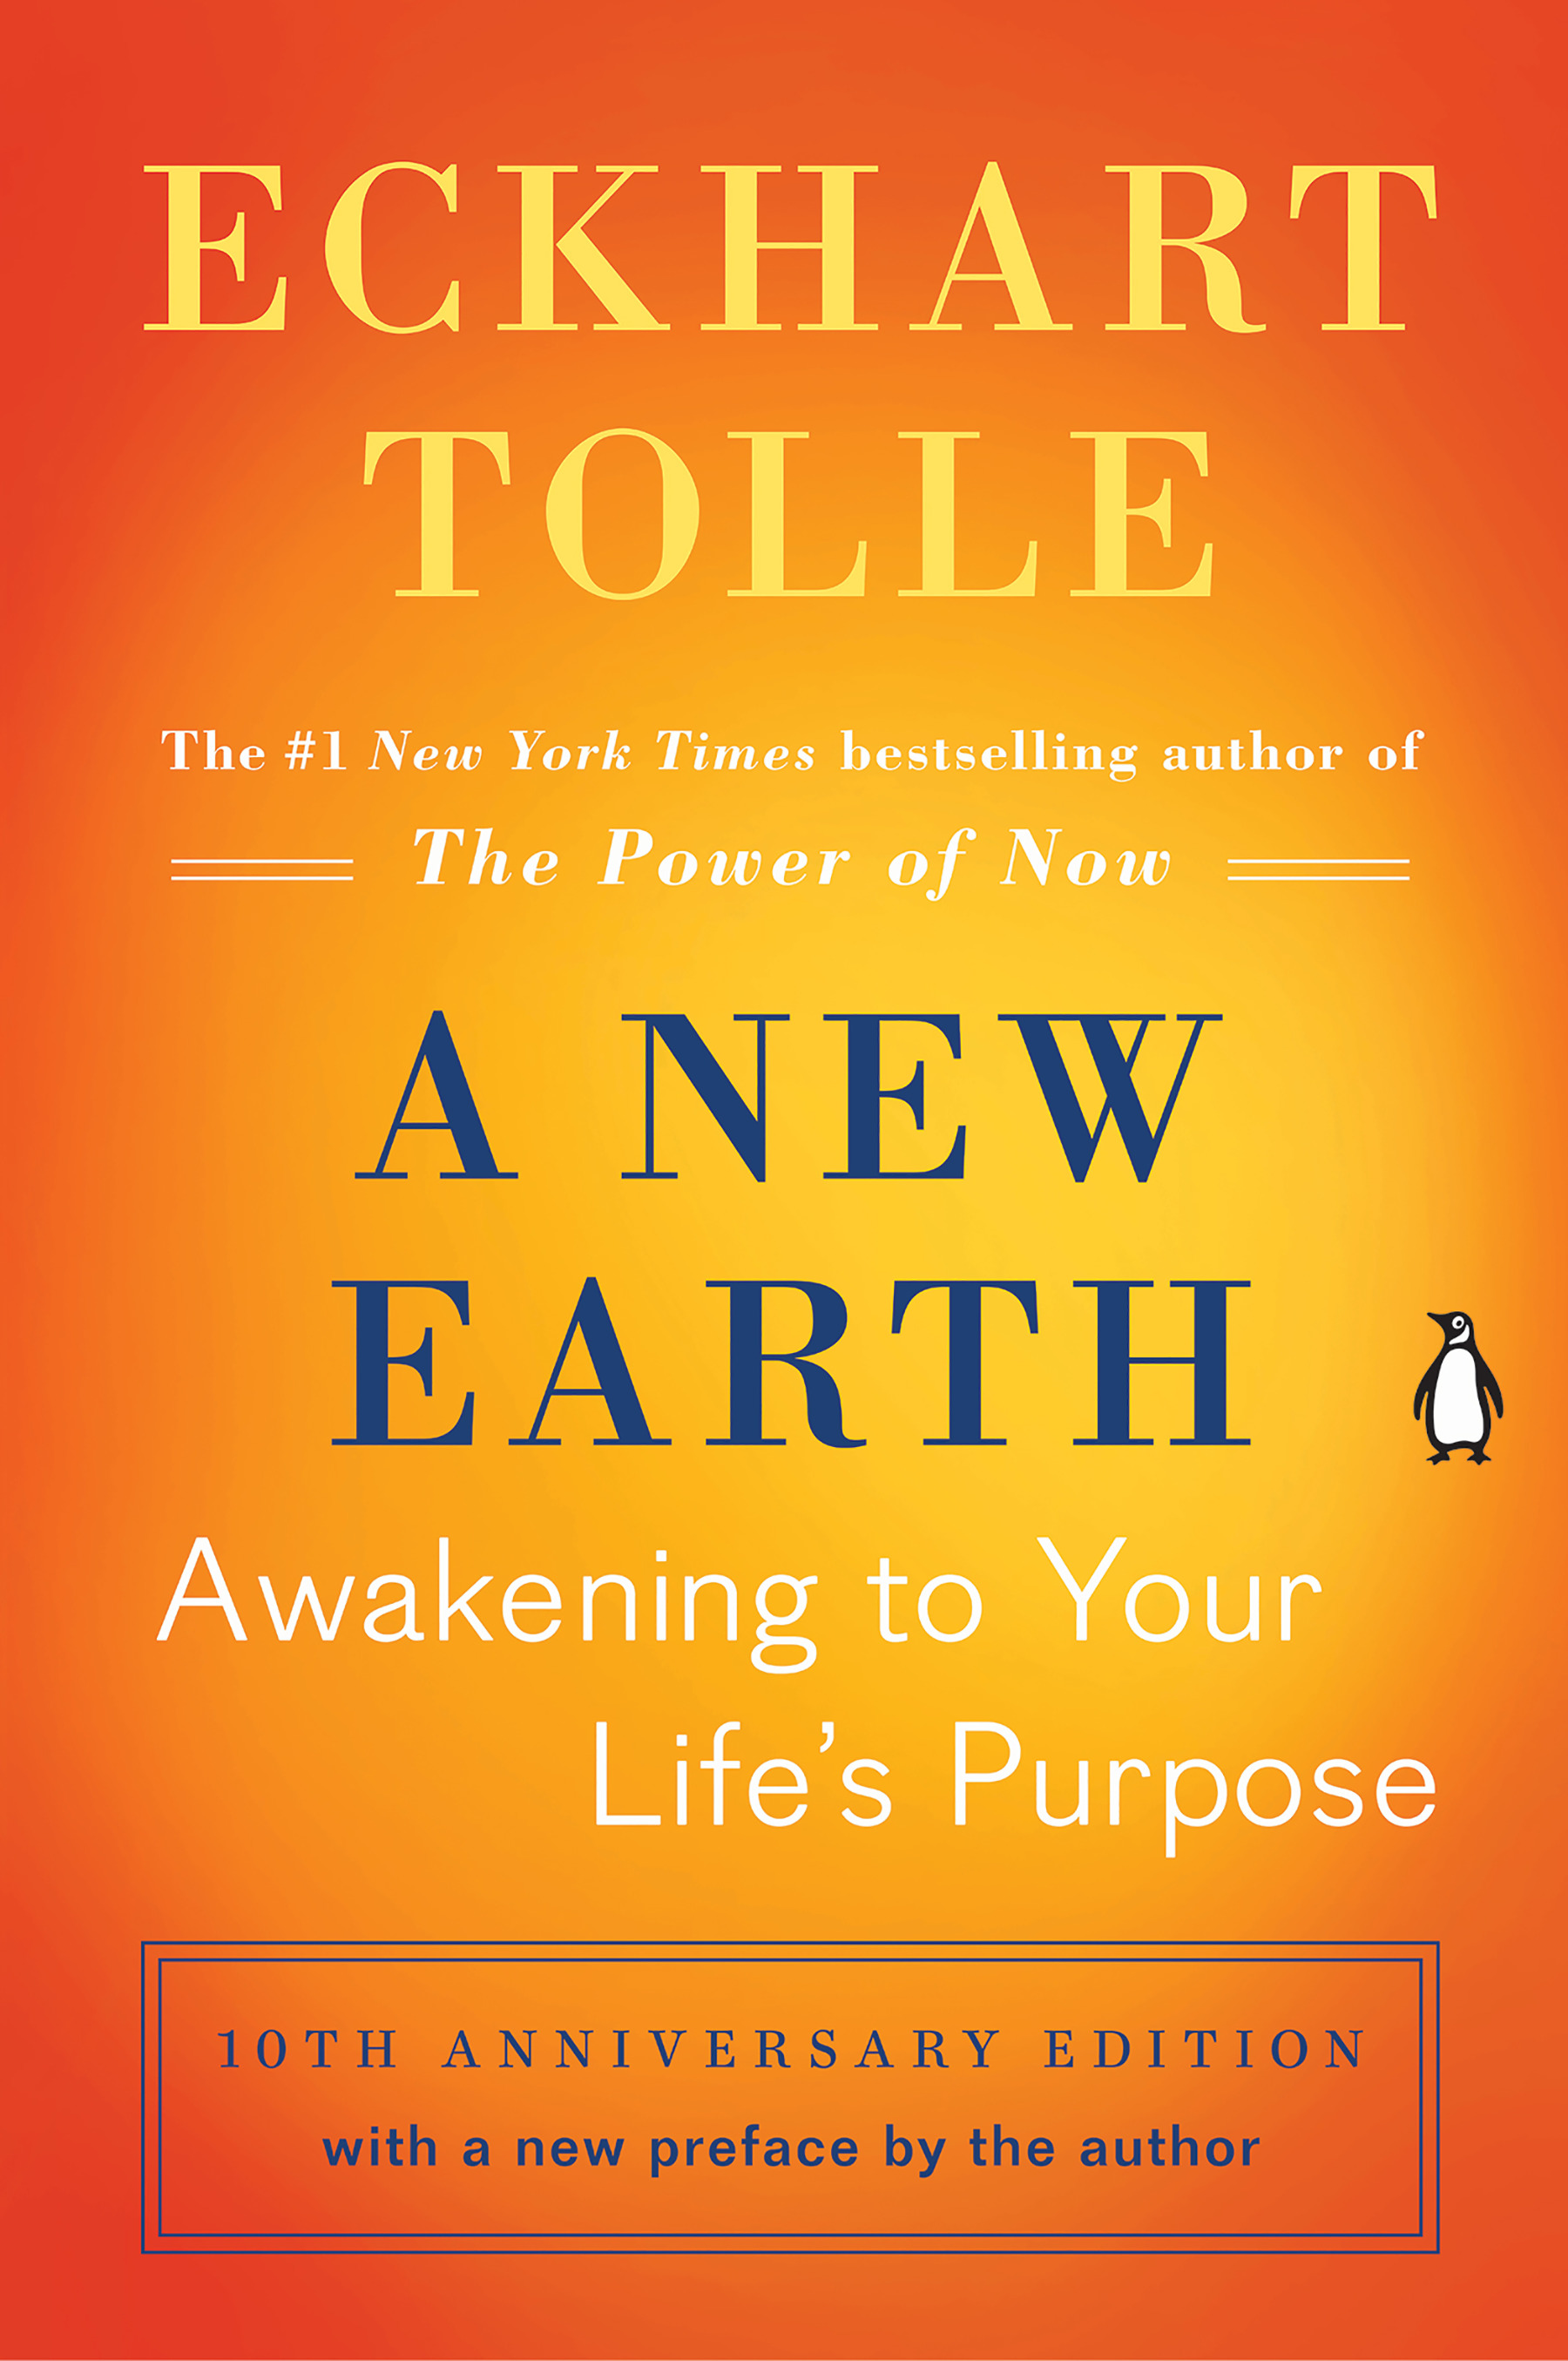 A New Earth (Oprah #61) : Awakening to Your Life's Purpose | Tolle, Eckhart